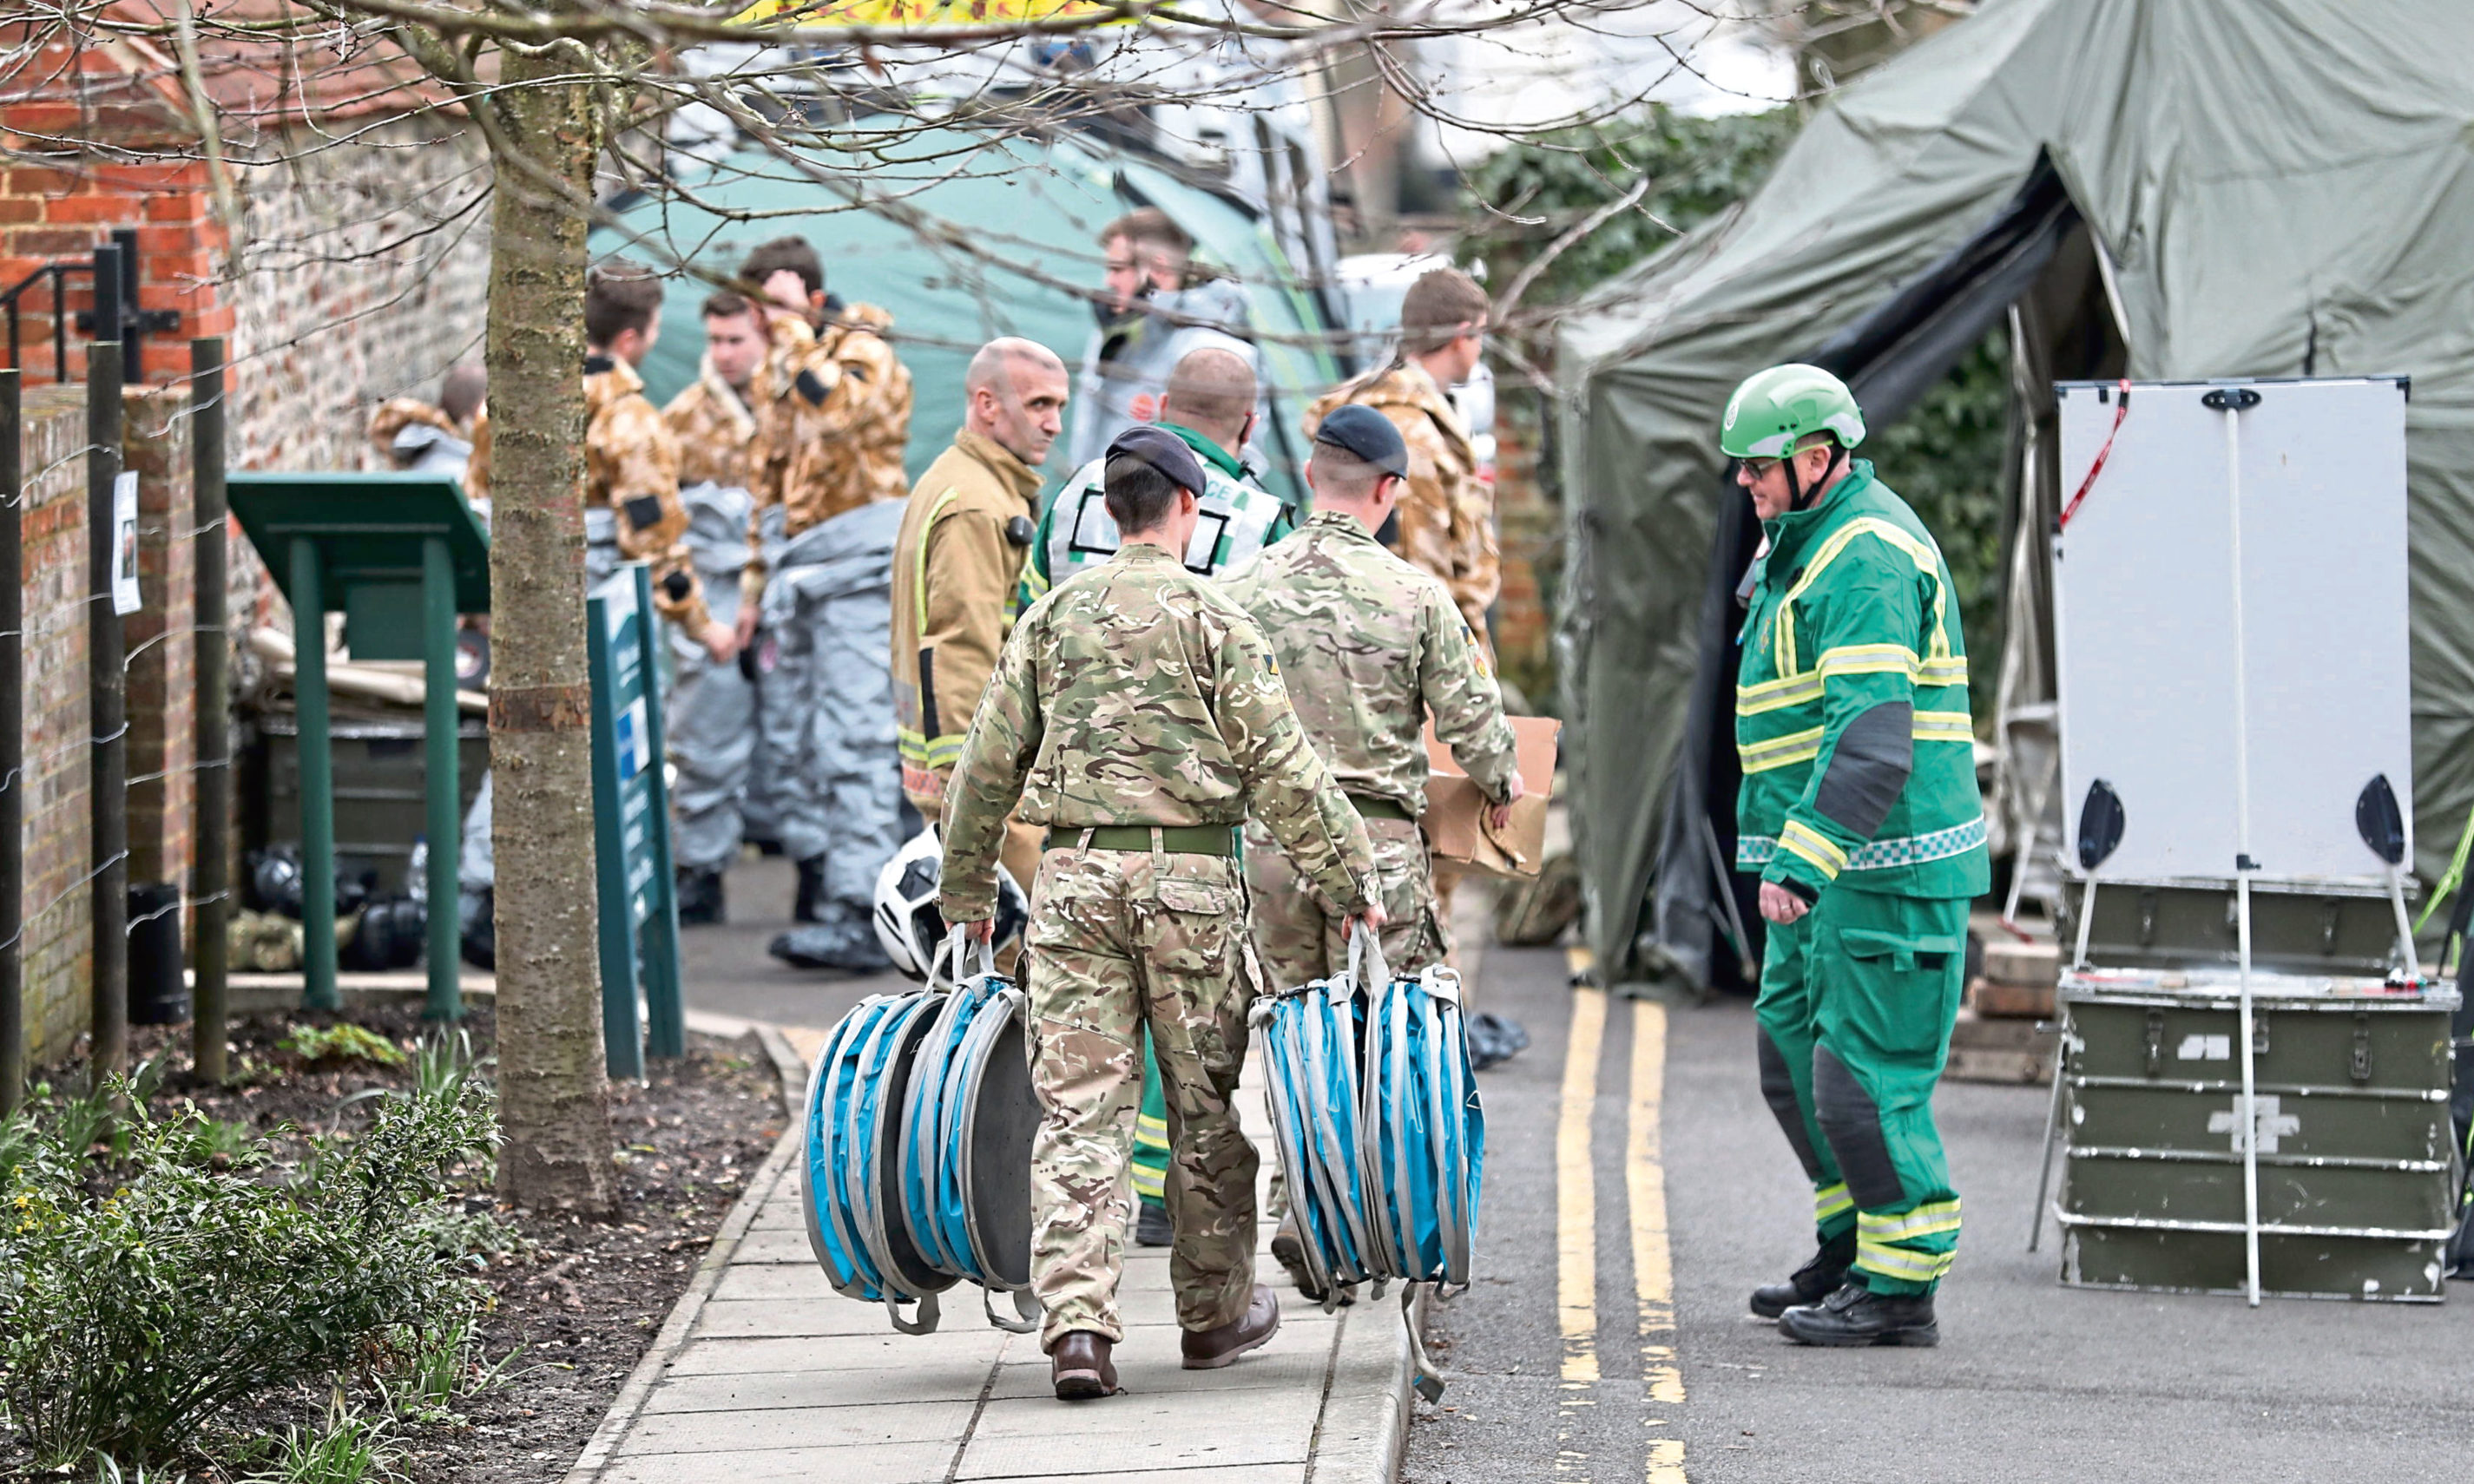 Military and emergency services personnel outside Bourne Hill police station in Salisbury, as police and members of the armed forces probe the suspected nerve agent attack on Russian double agent Sergei Skripal.